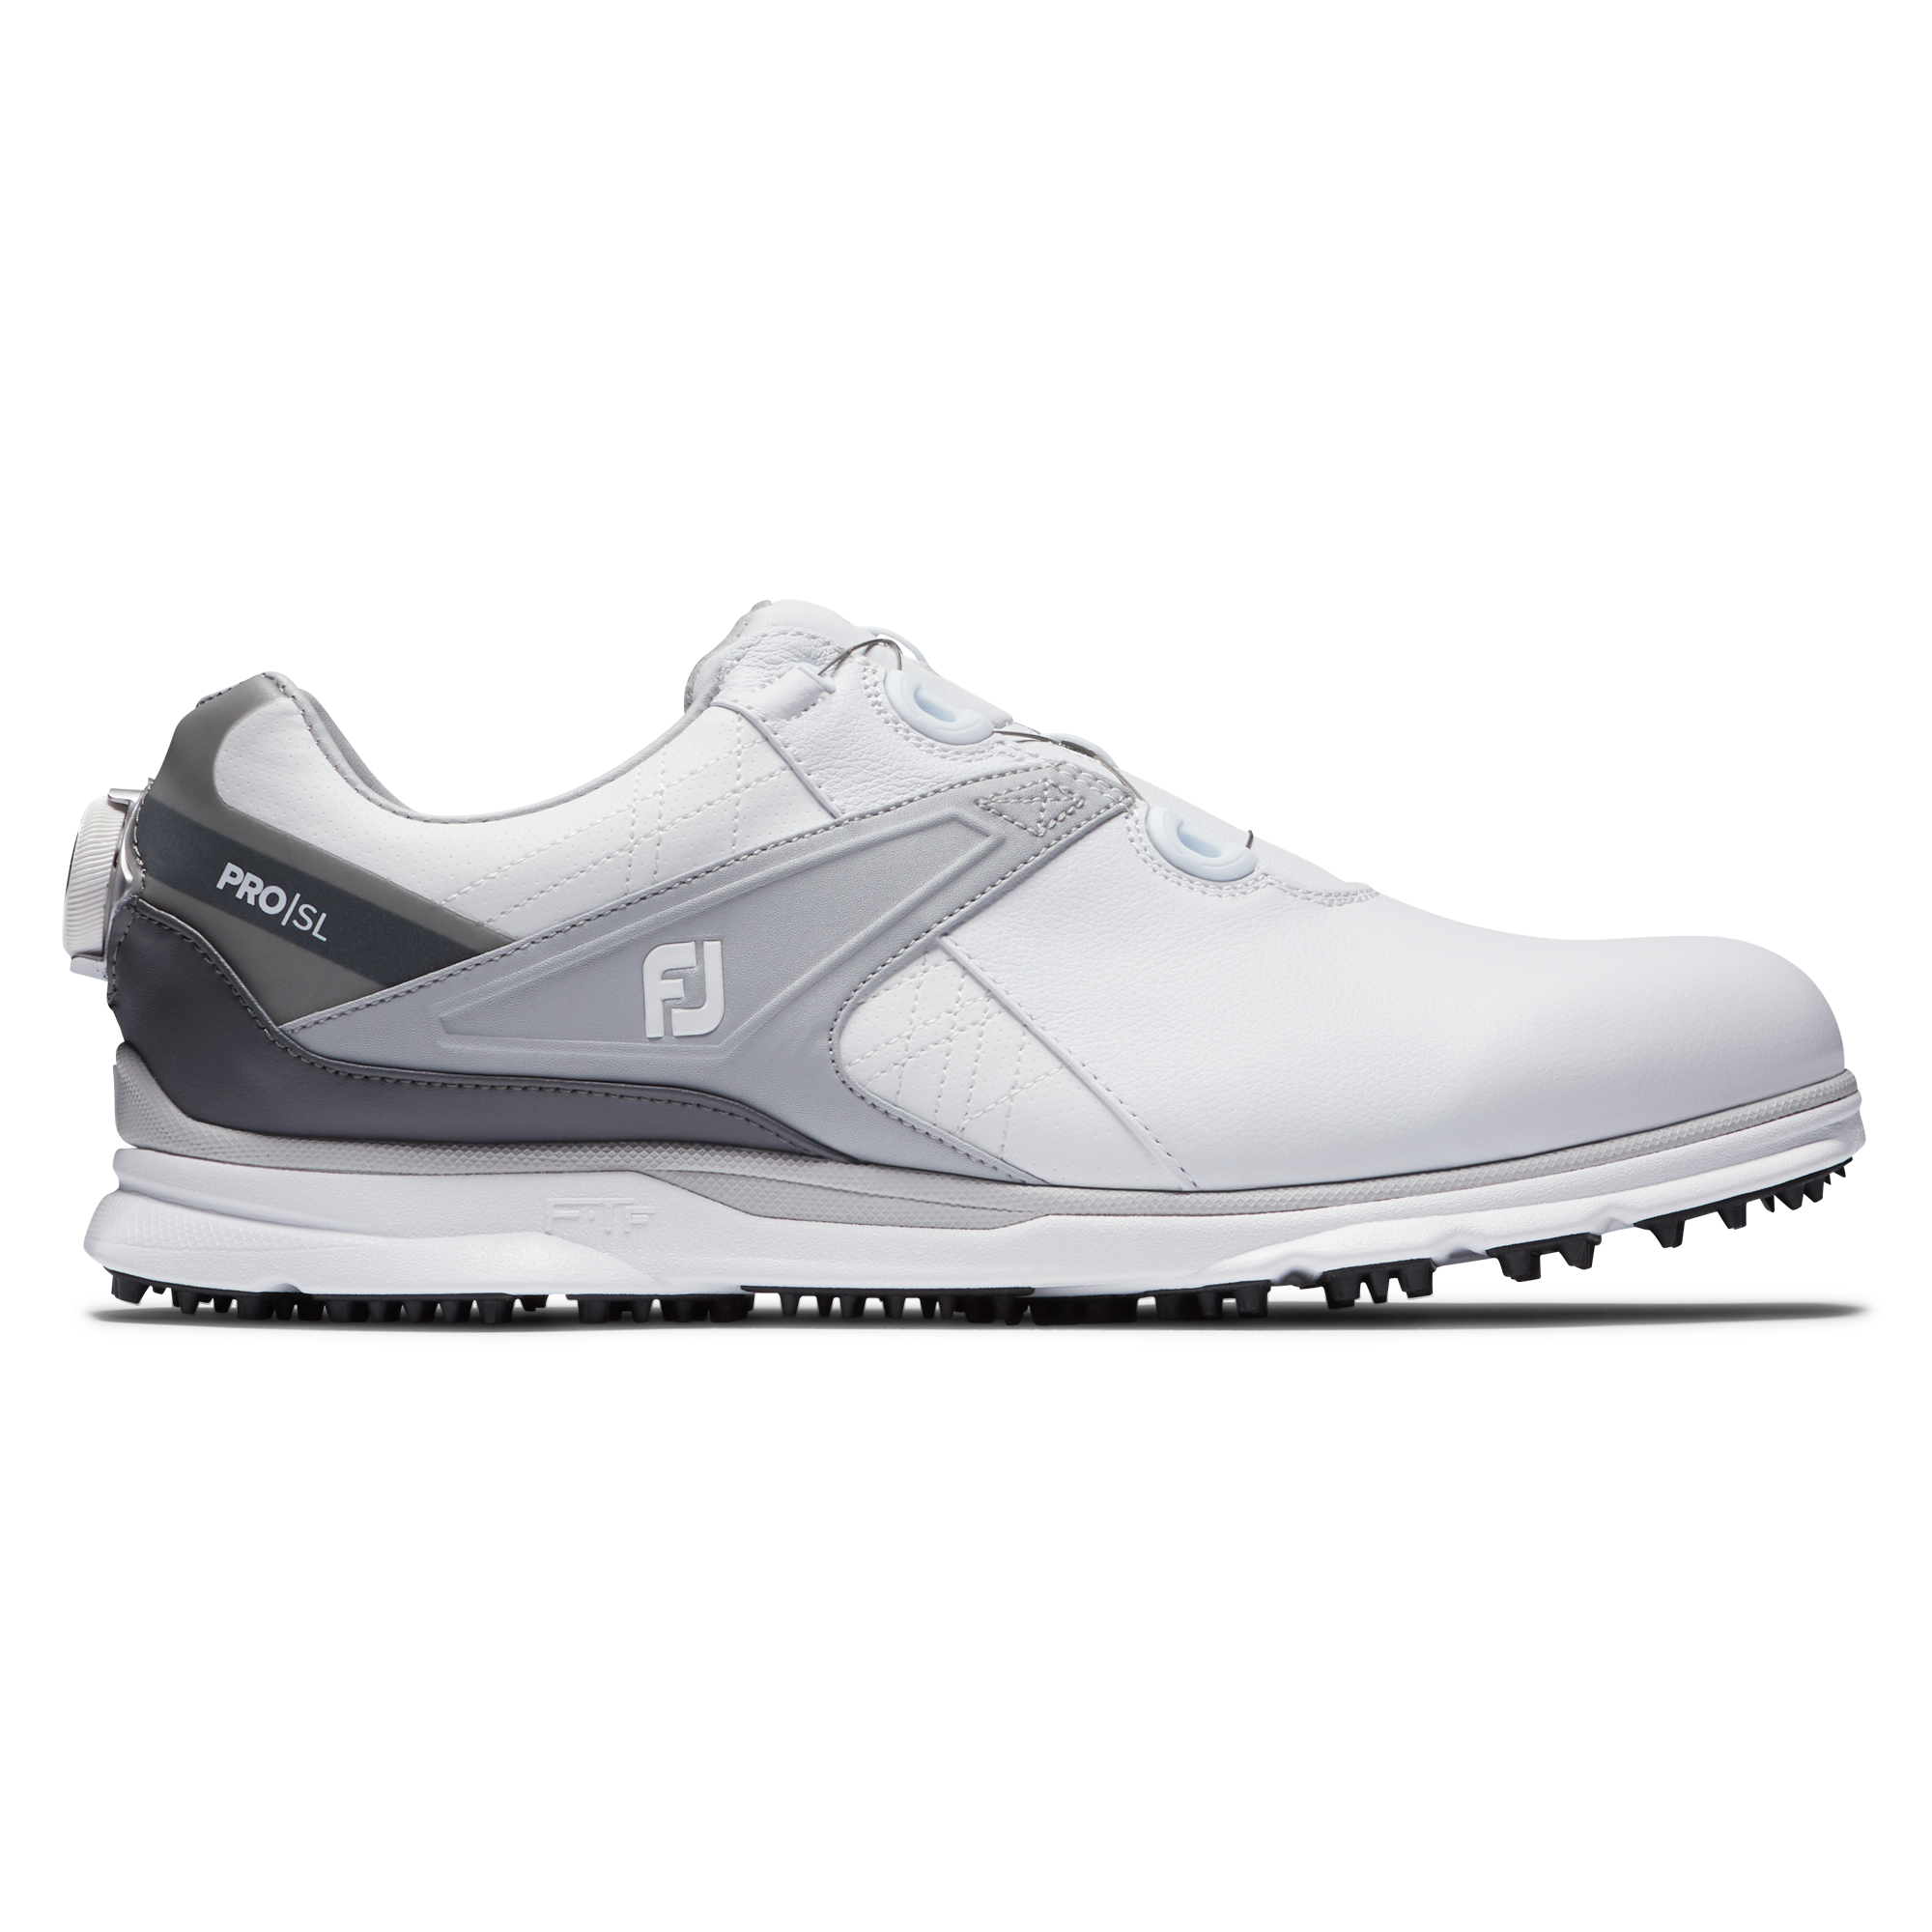 mens casual golf shoes